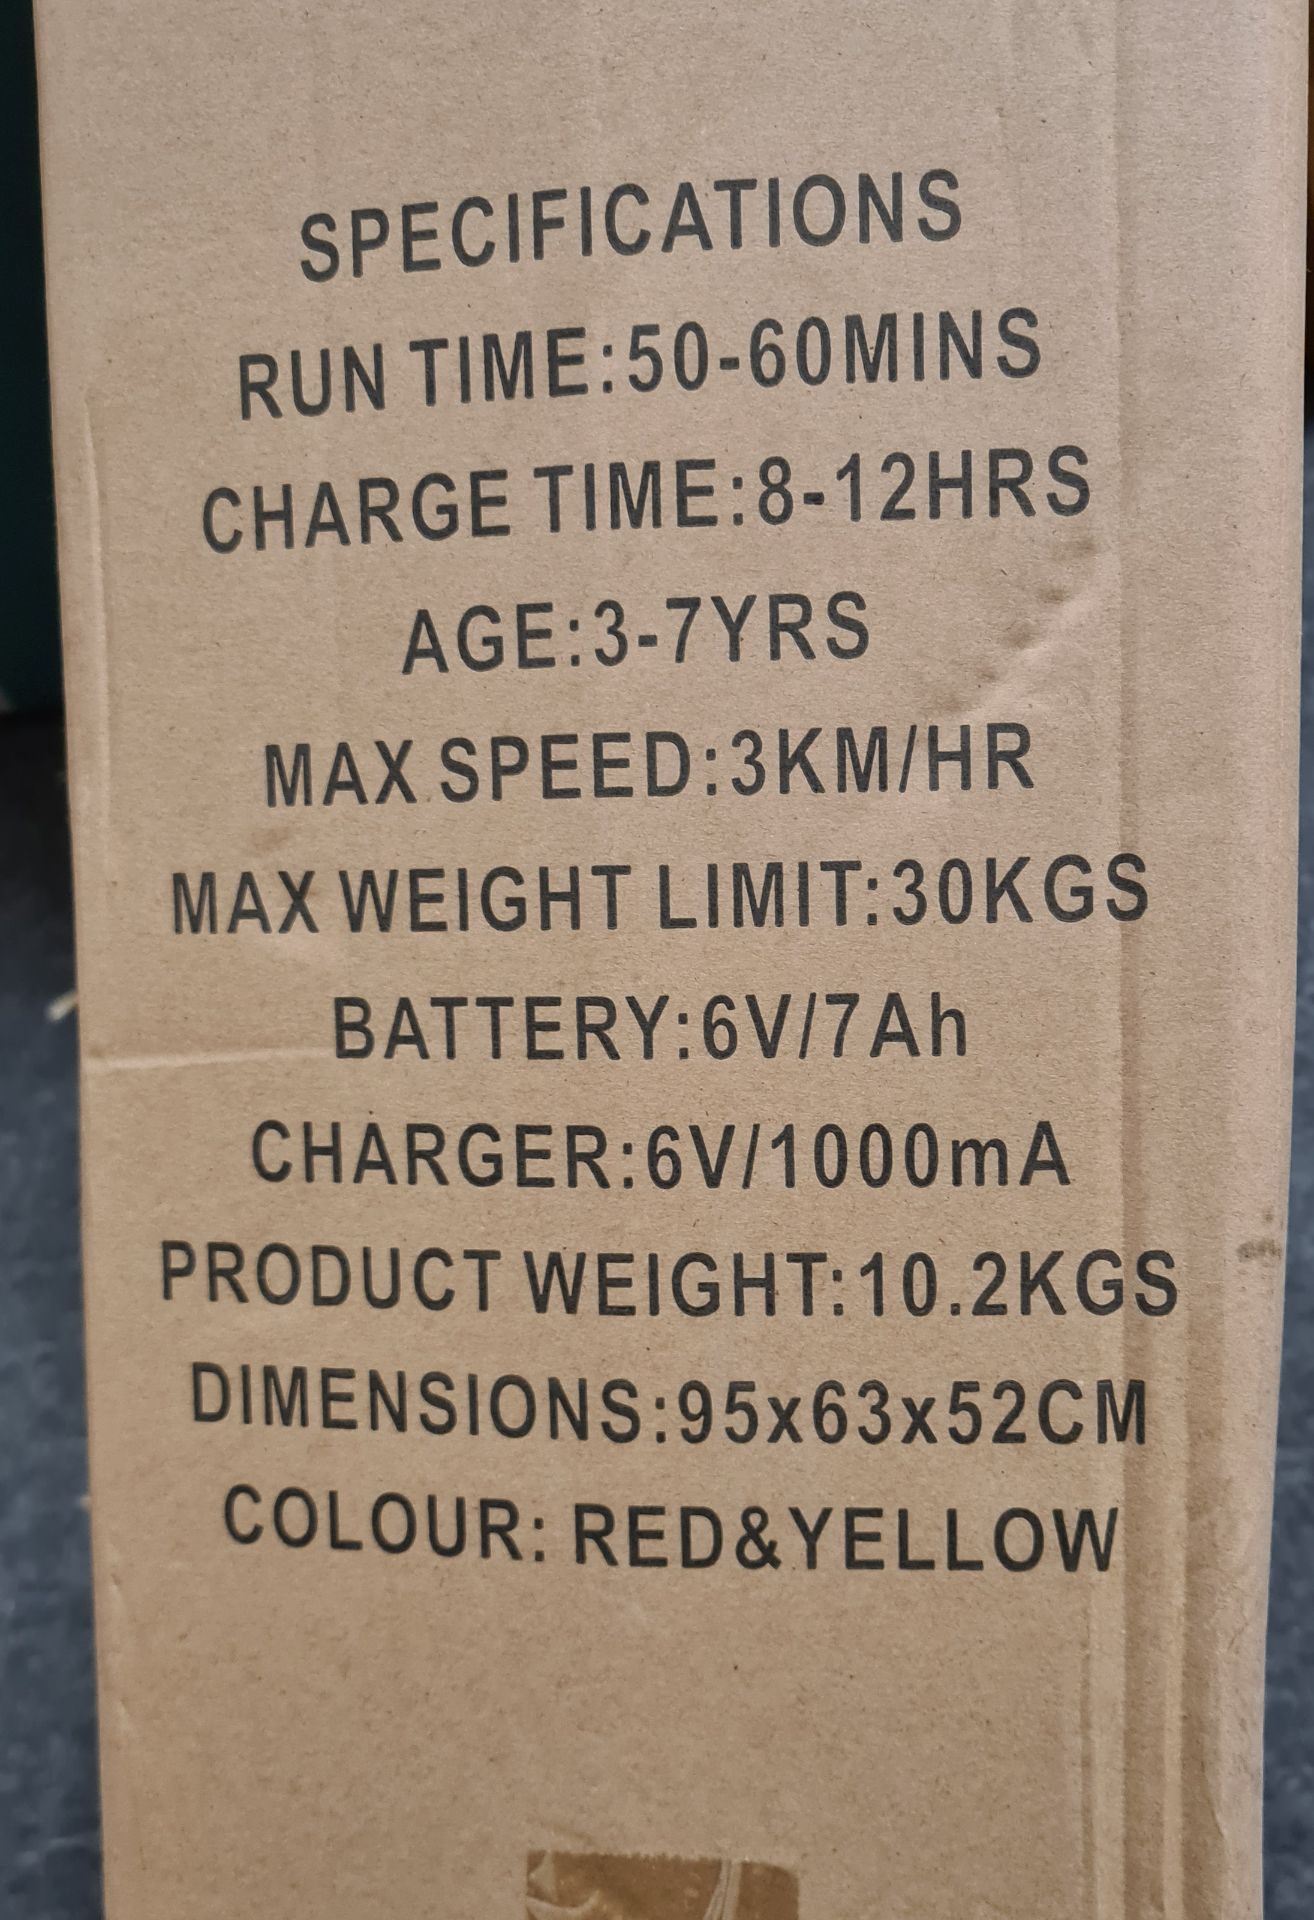 15 X ELECTRIC 6V RIDE ON GO KART - RED / YELLOW £2250- BRAND NEW FOR KIDS - Image 10 of 10